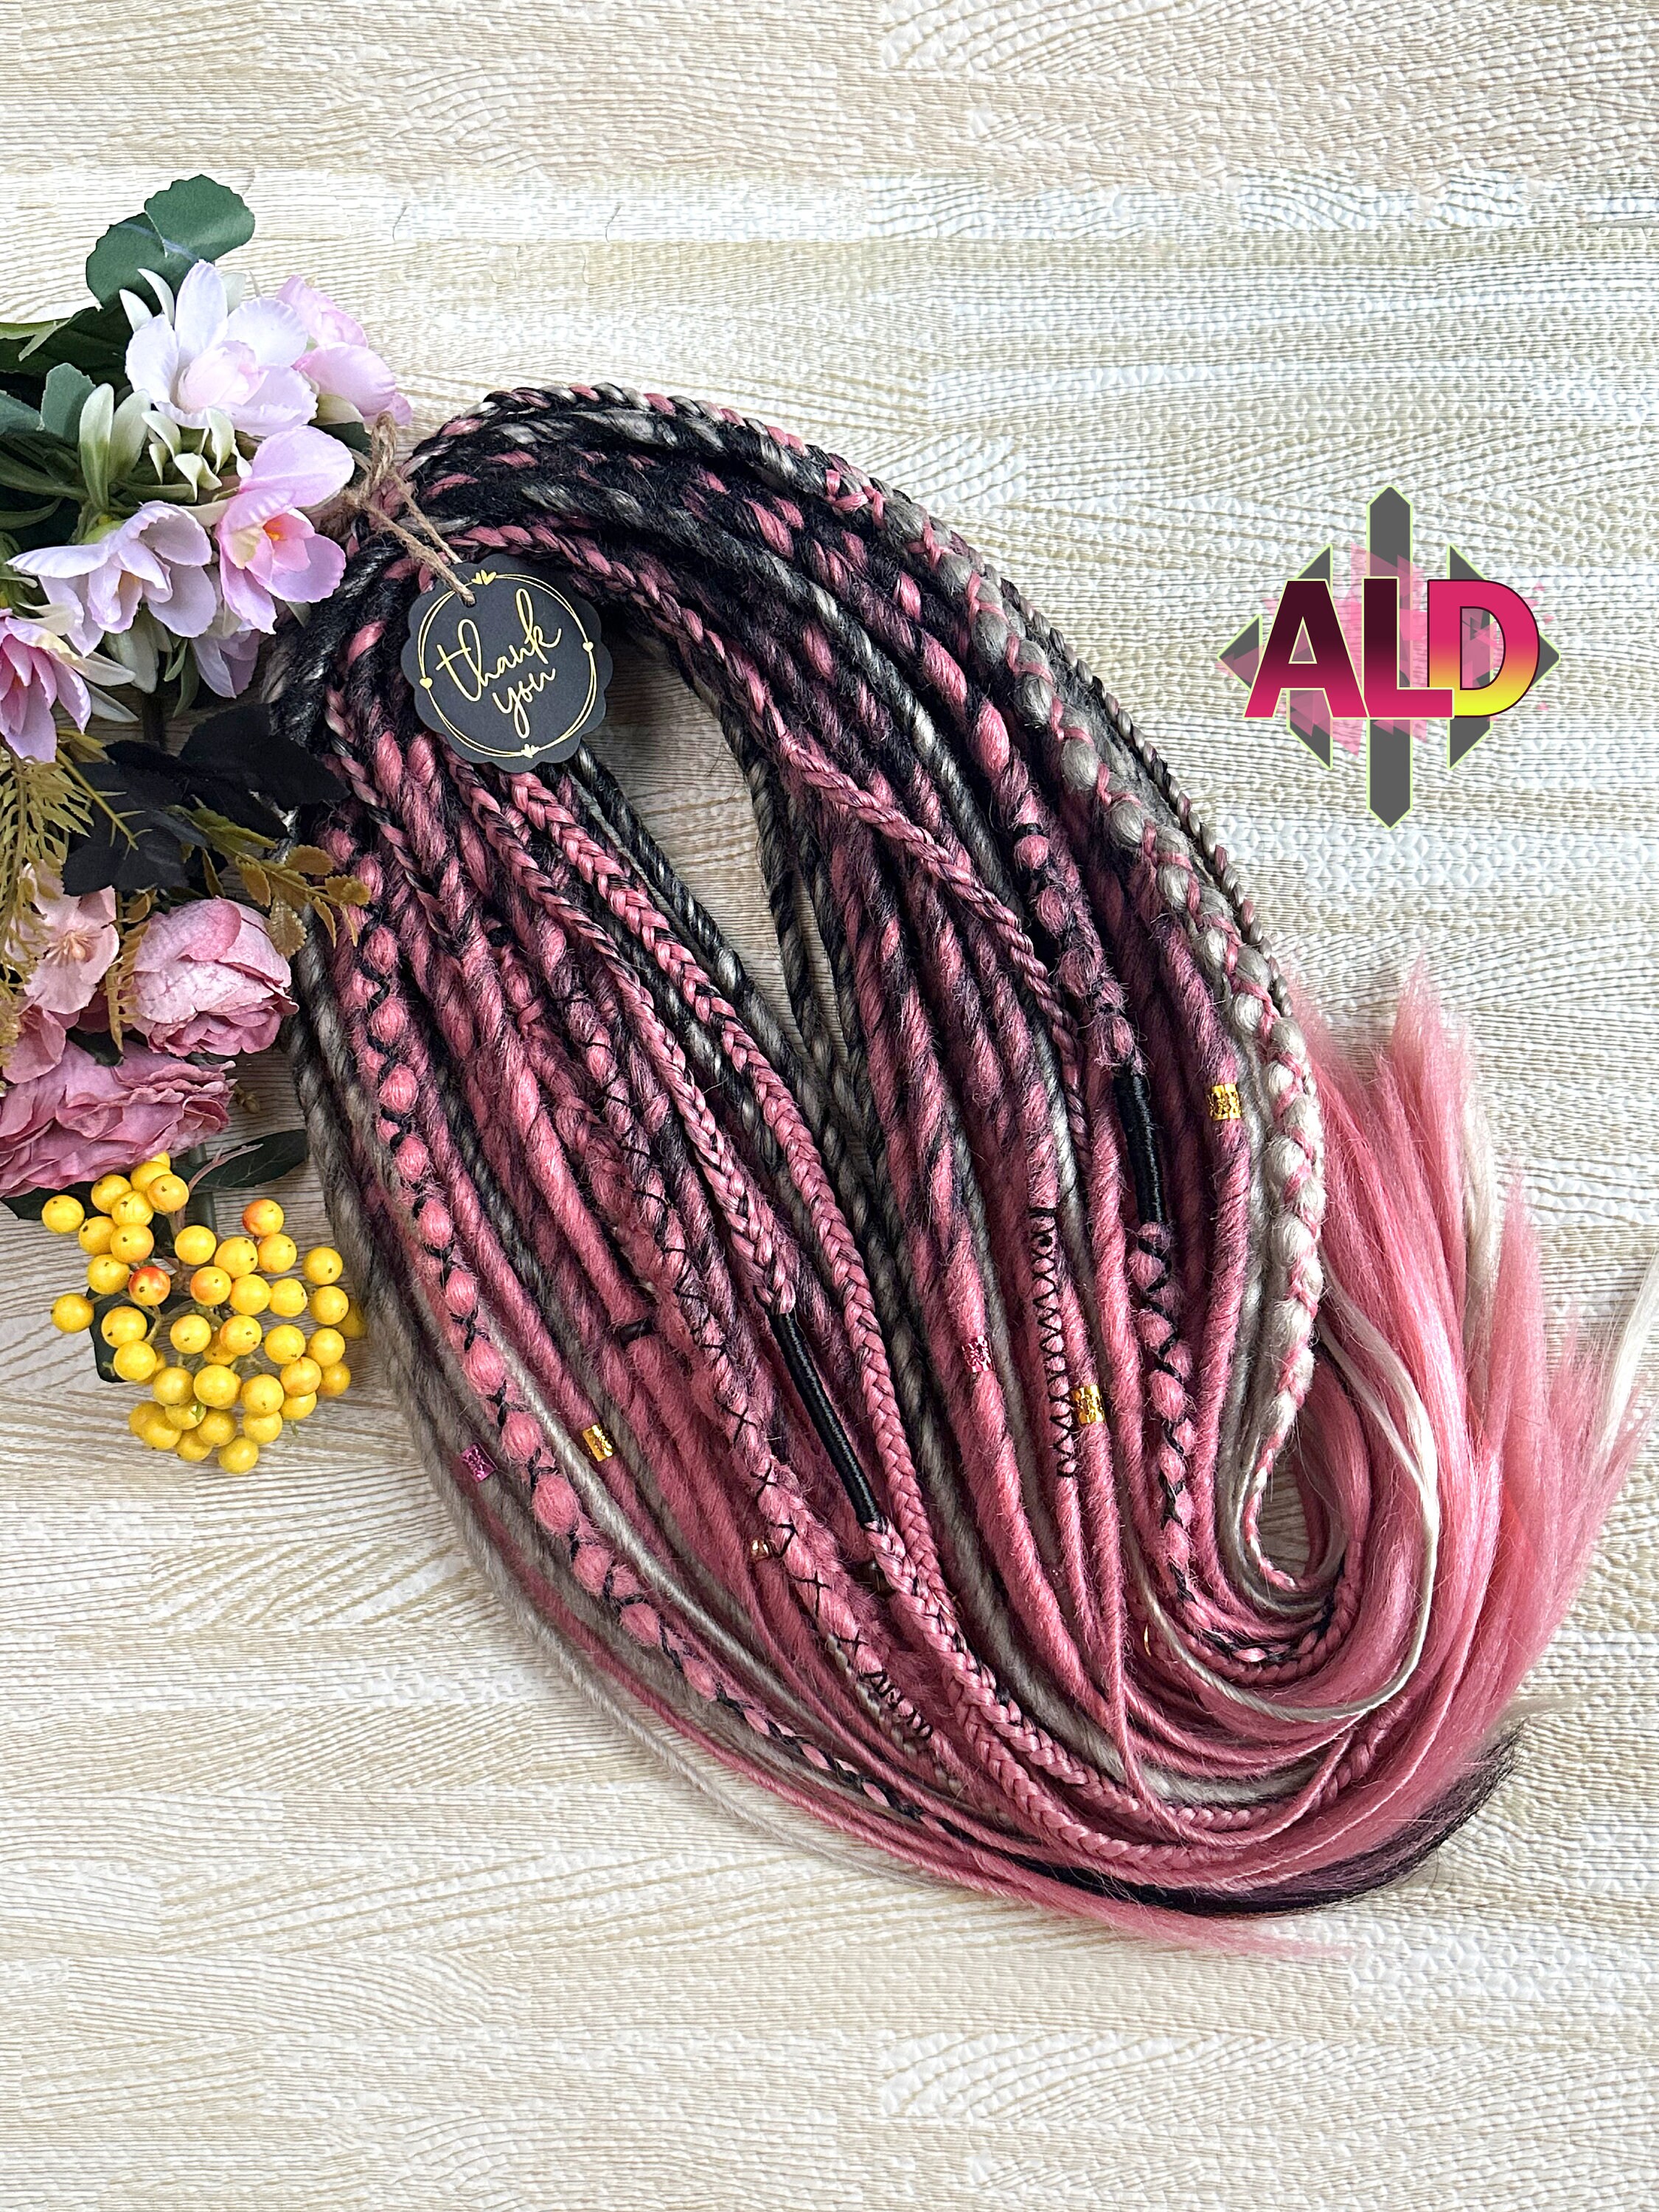 Bulk Hair Feathers Pink Shades Long Feather Extensions Ballerina Pink  Pastel Bubblegum Pink Feathers With Stripes Wholesale Hackle 25PCS 